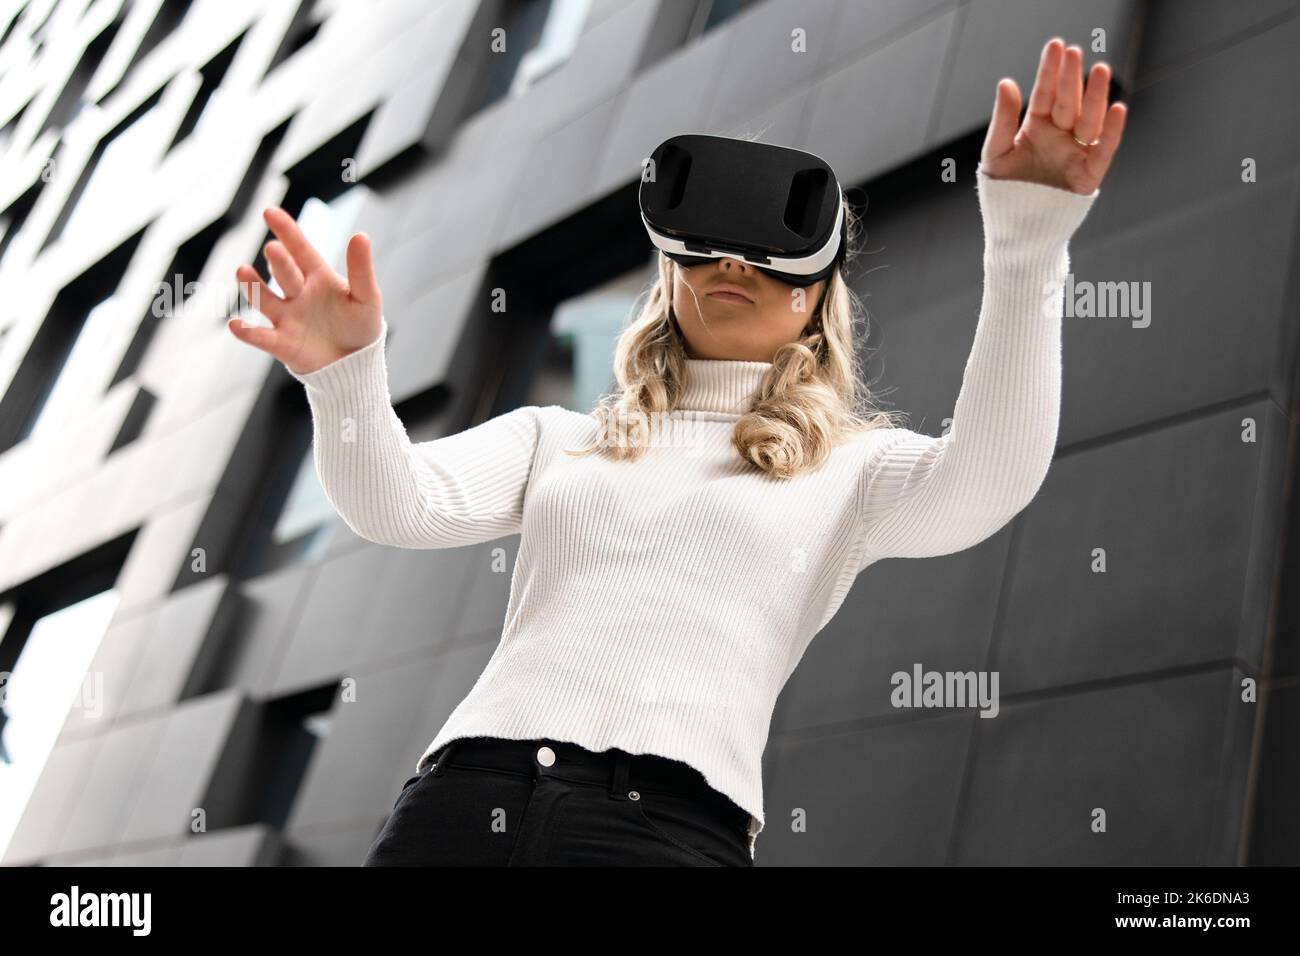 Woman Gesturing Using Virtual Reality Glasses In Metaverse Business Stock Photo